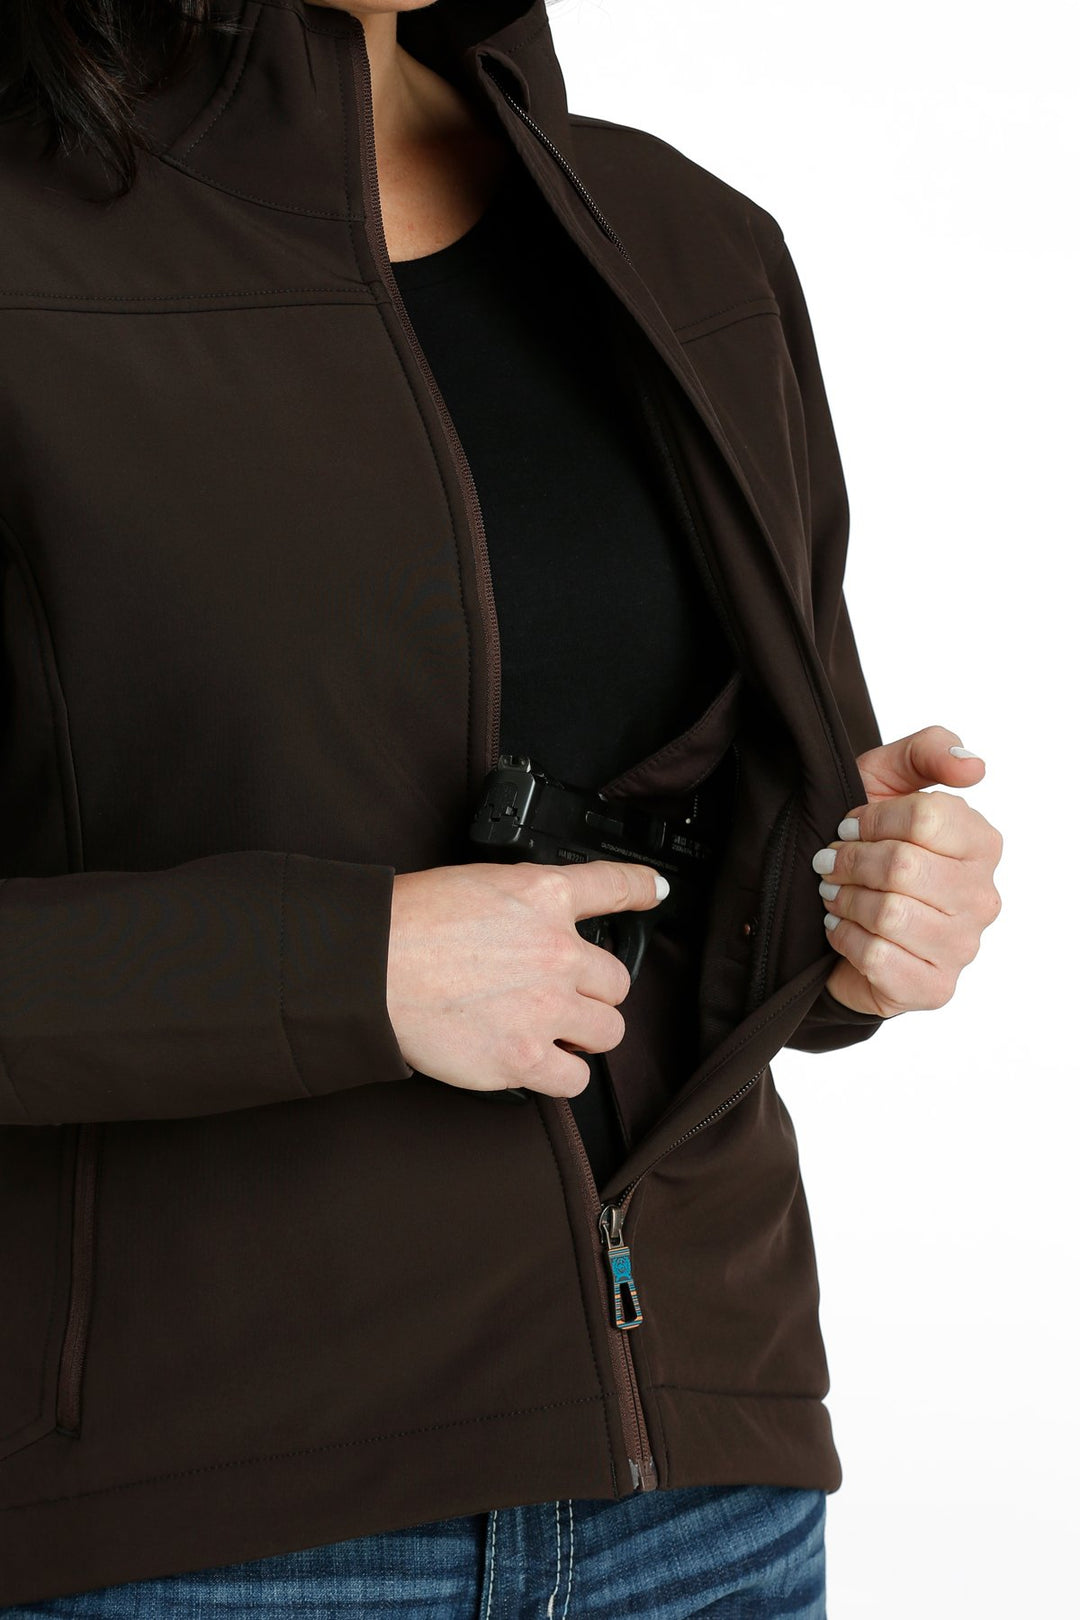 Cinch Women's Concealed Carry Bonded Jacket